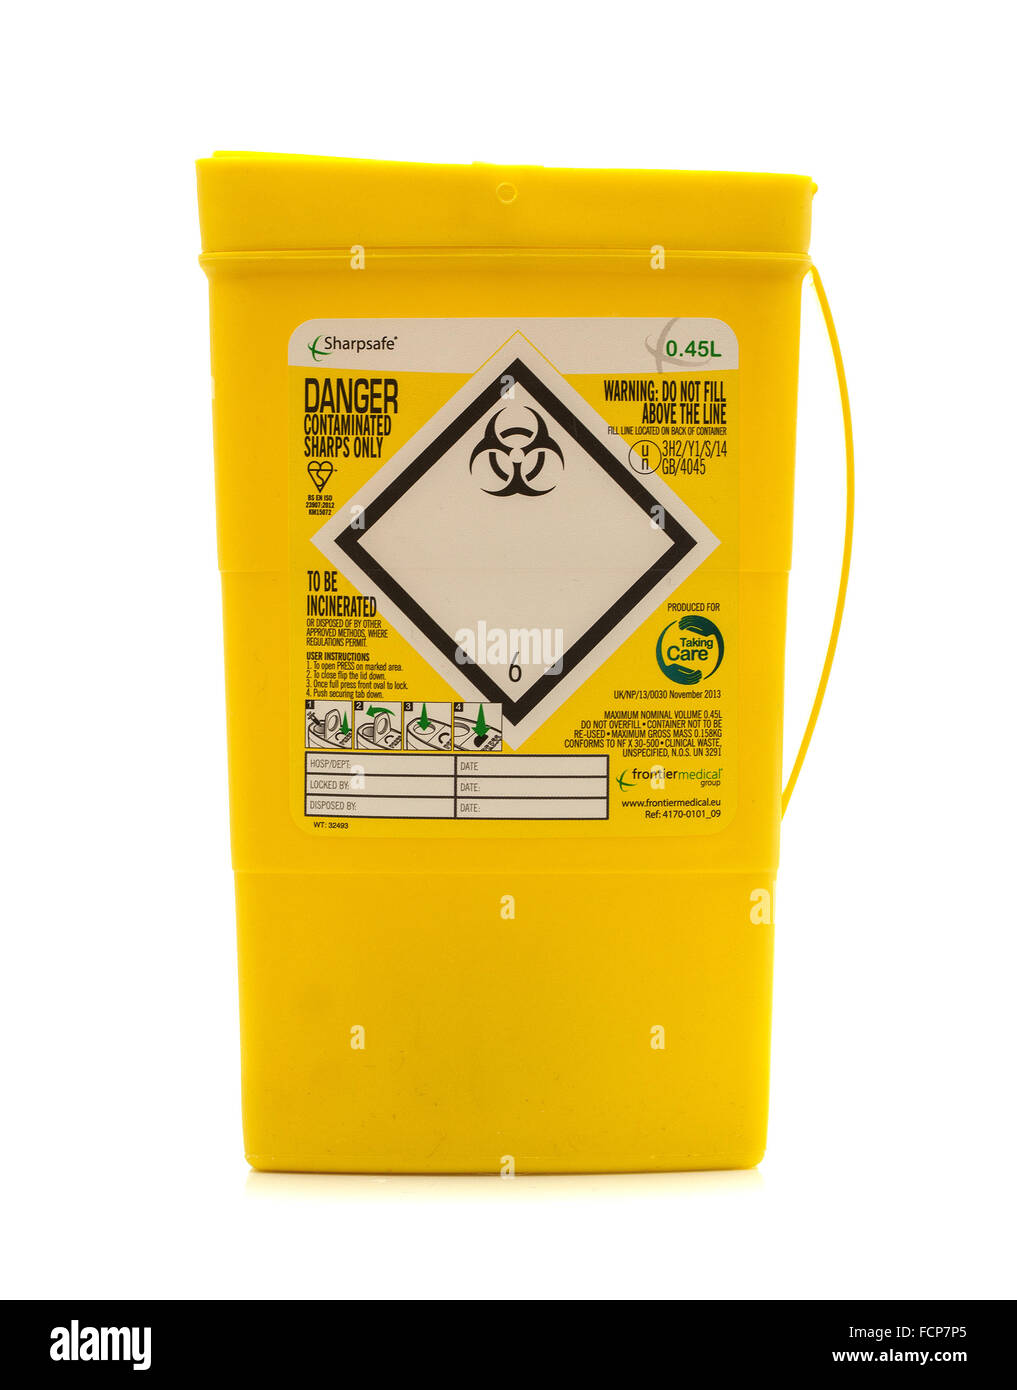 Yellow Sharpsafe biohazard medical contaminated sharps clinical waste container isolated on white Stock Photo